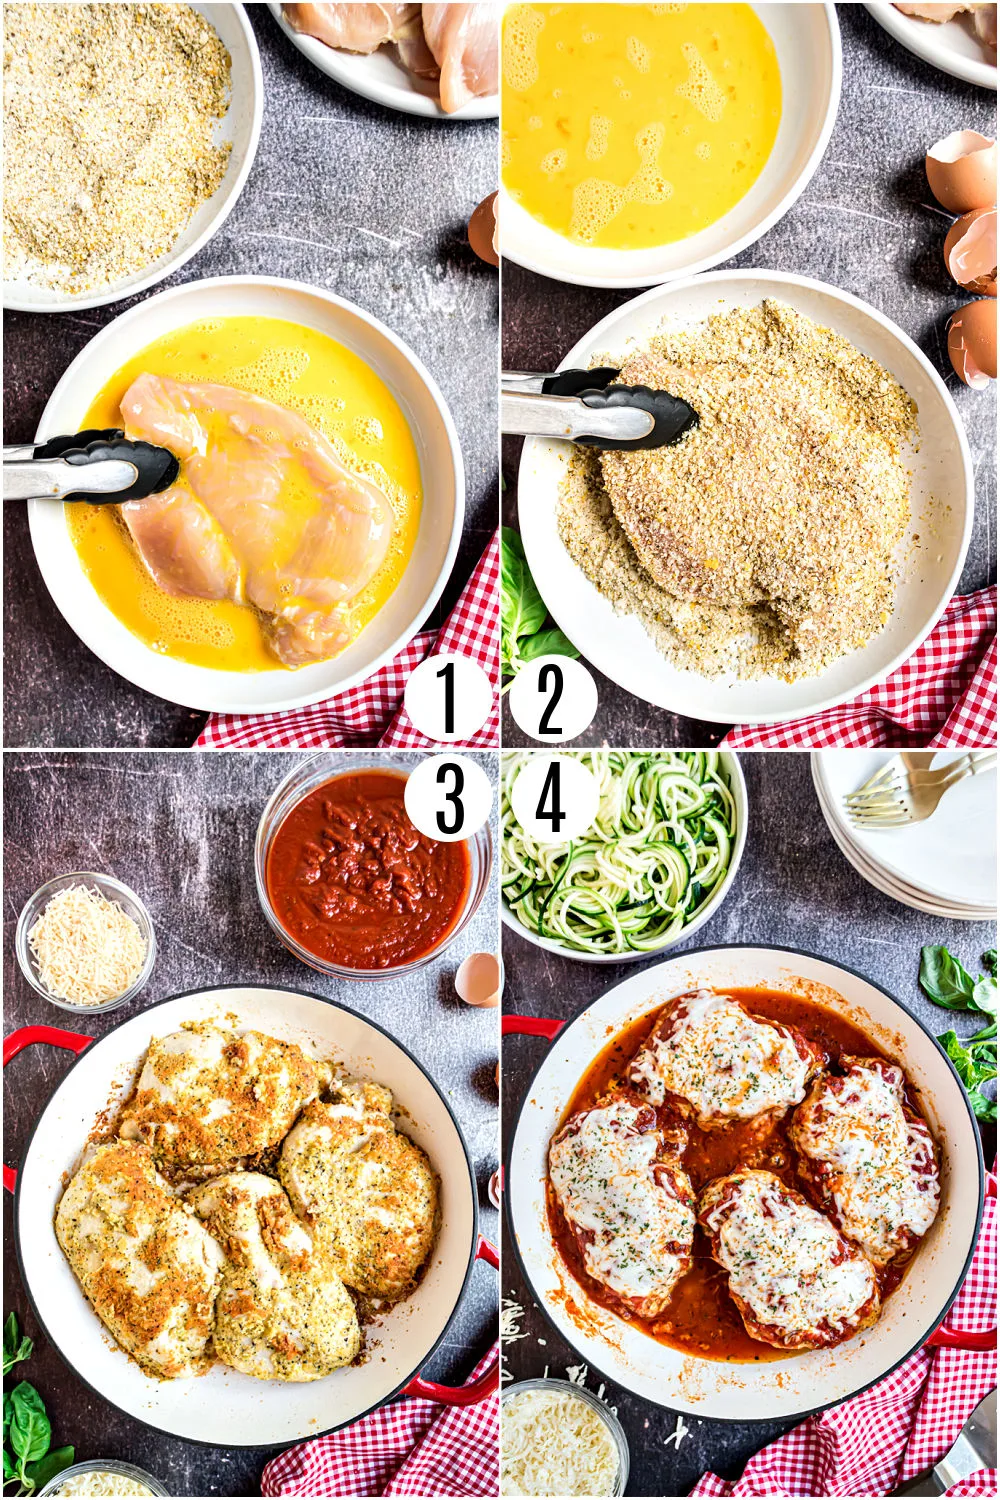 Step by step photos showing how to make gluten free chicken parmesan.